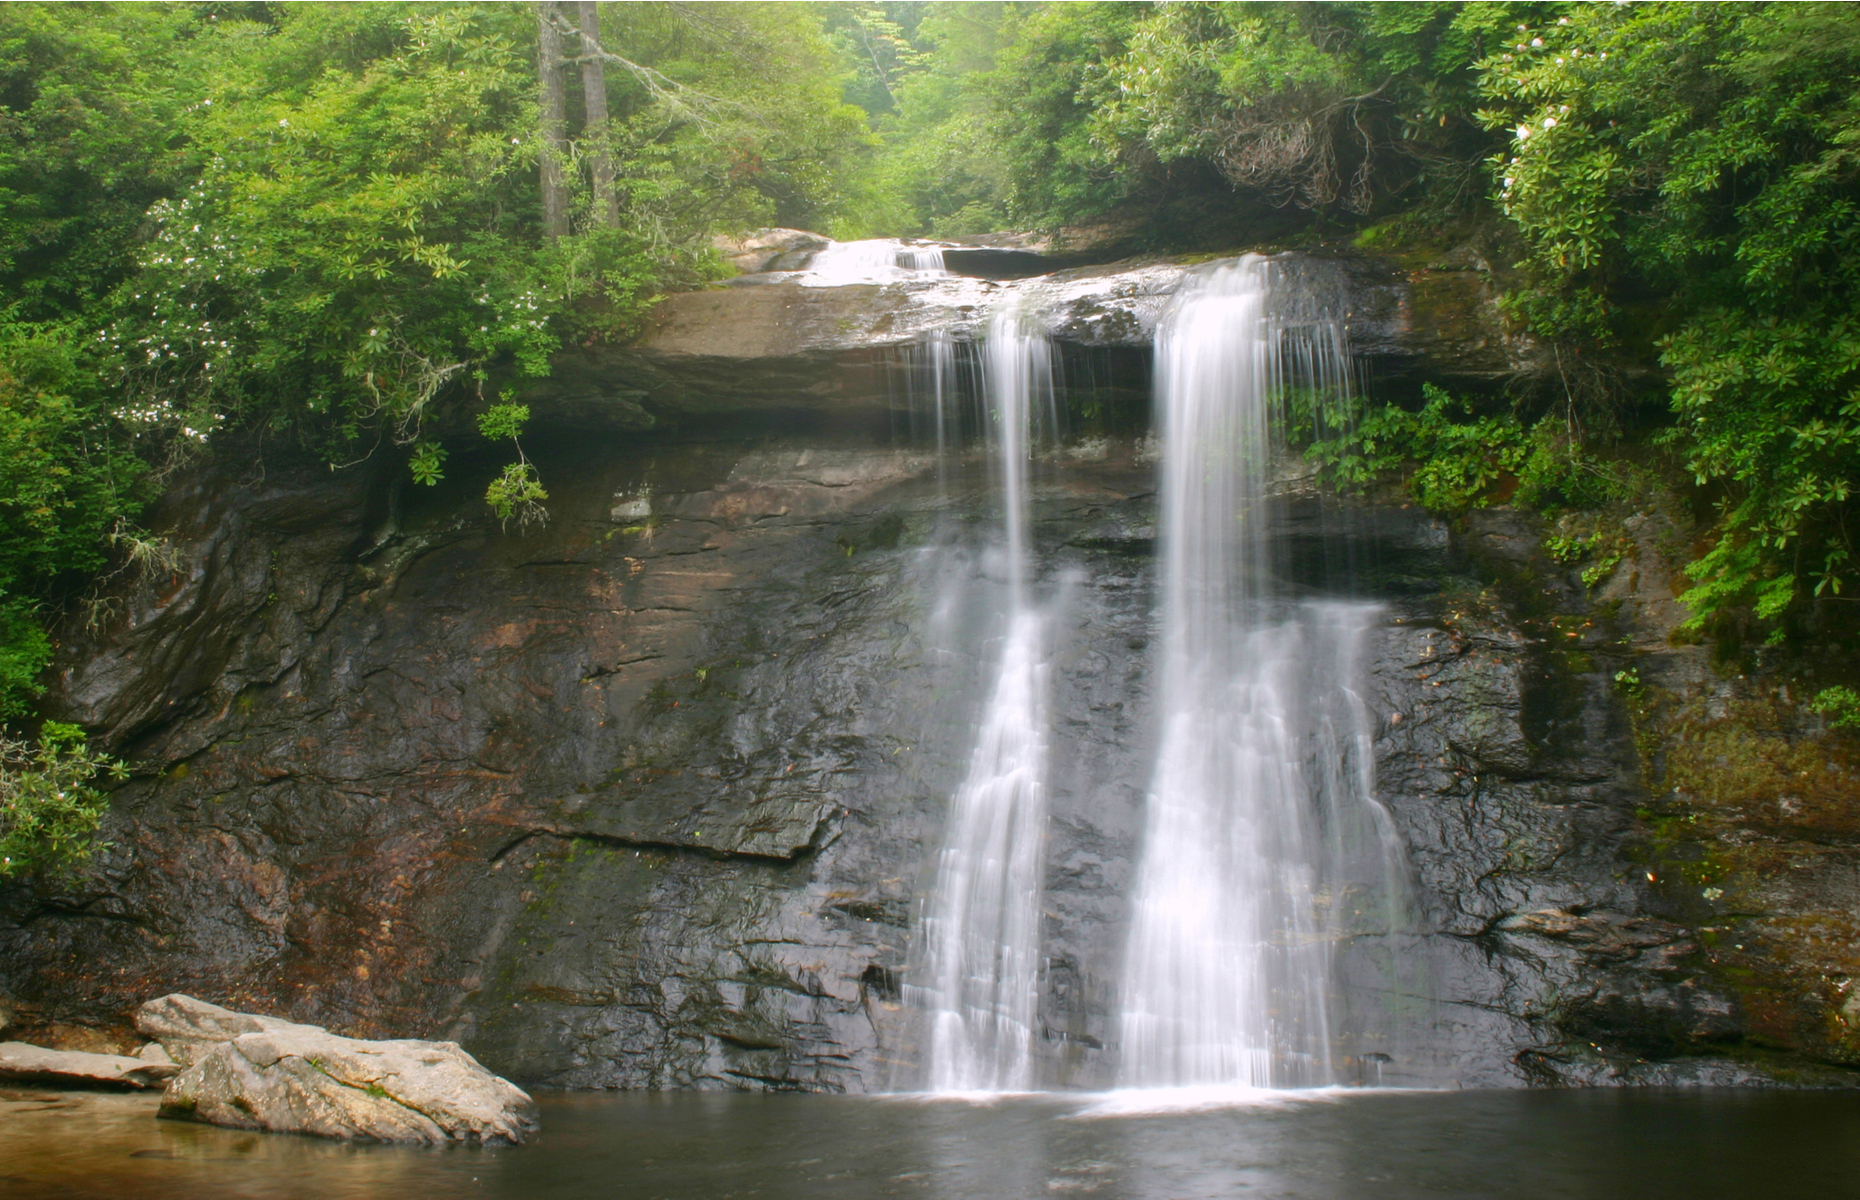 <p class="p1"><span>The name’s a bit of a misnomer since you should have no problem reaching it via a quick hike, and by now it’s hardly a secret to the locals, but <a href="https://www.romanticasheville.com/secret-falls.htm" rel="noreferrer noopener"><span>Secret Falls</span></a> still remains one of the most underrated natural sites in North Carolina. With a sandy beach and clear waters, it’s the perfect spot to cool off on a steamy summer day. </span></p>